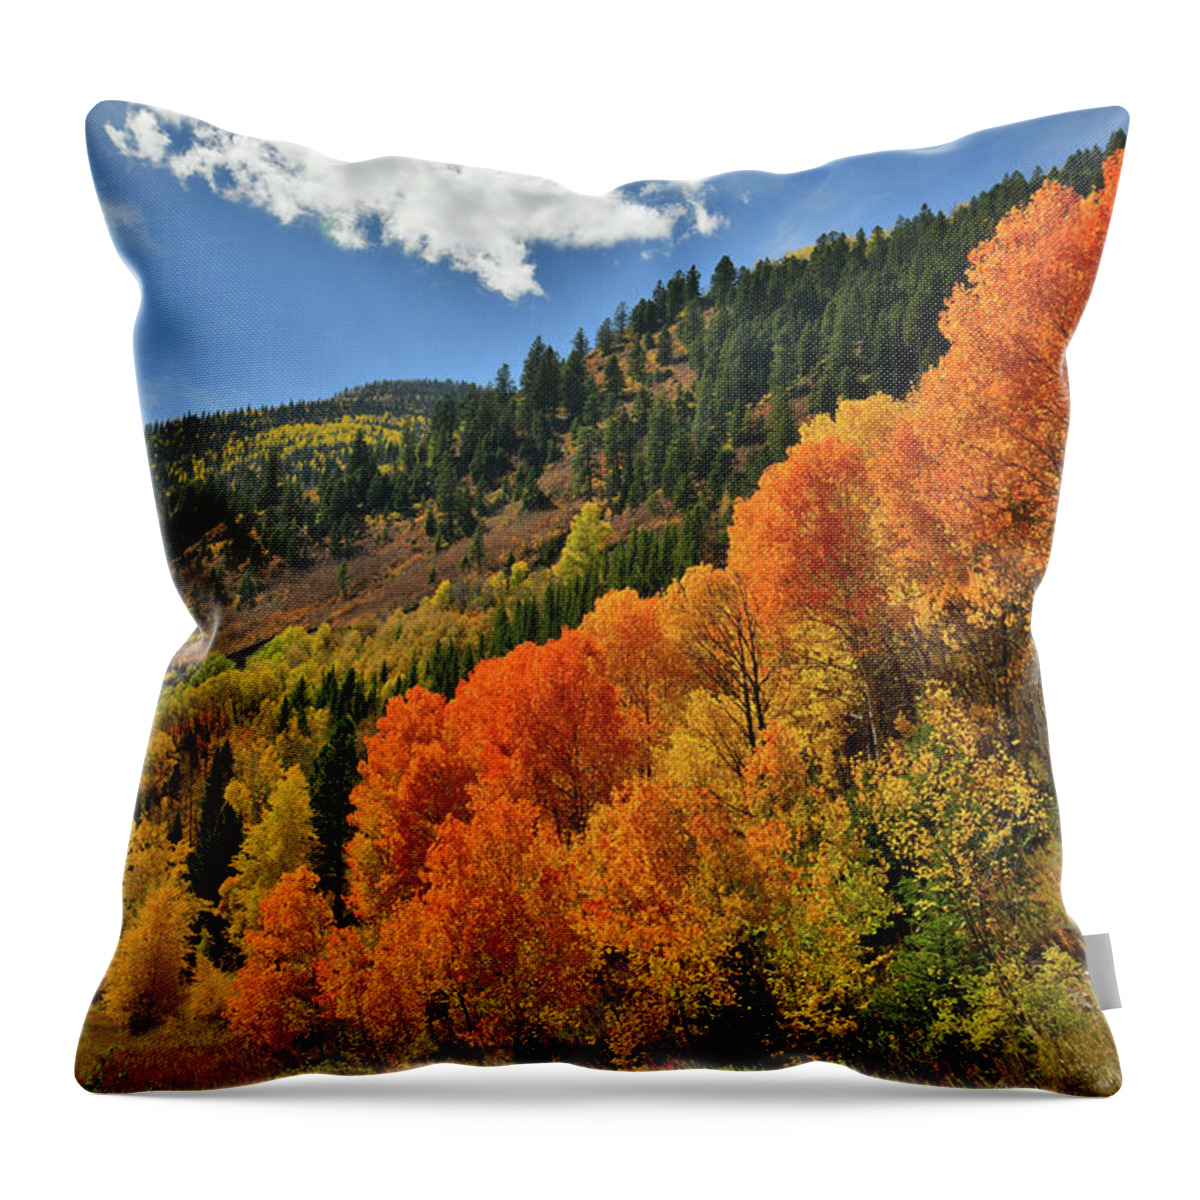 Colorado Throw Pillow featuring the photograph Red Aspens Along Highway 133 by Ray Mathis